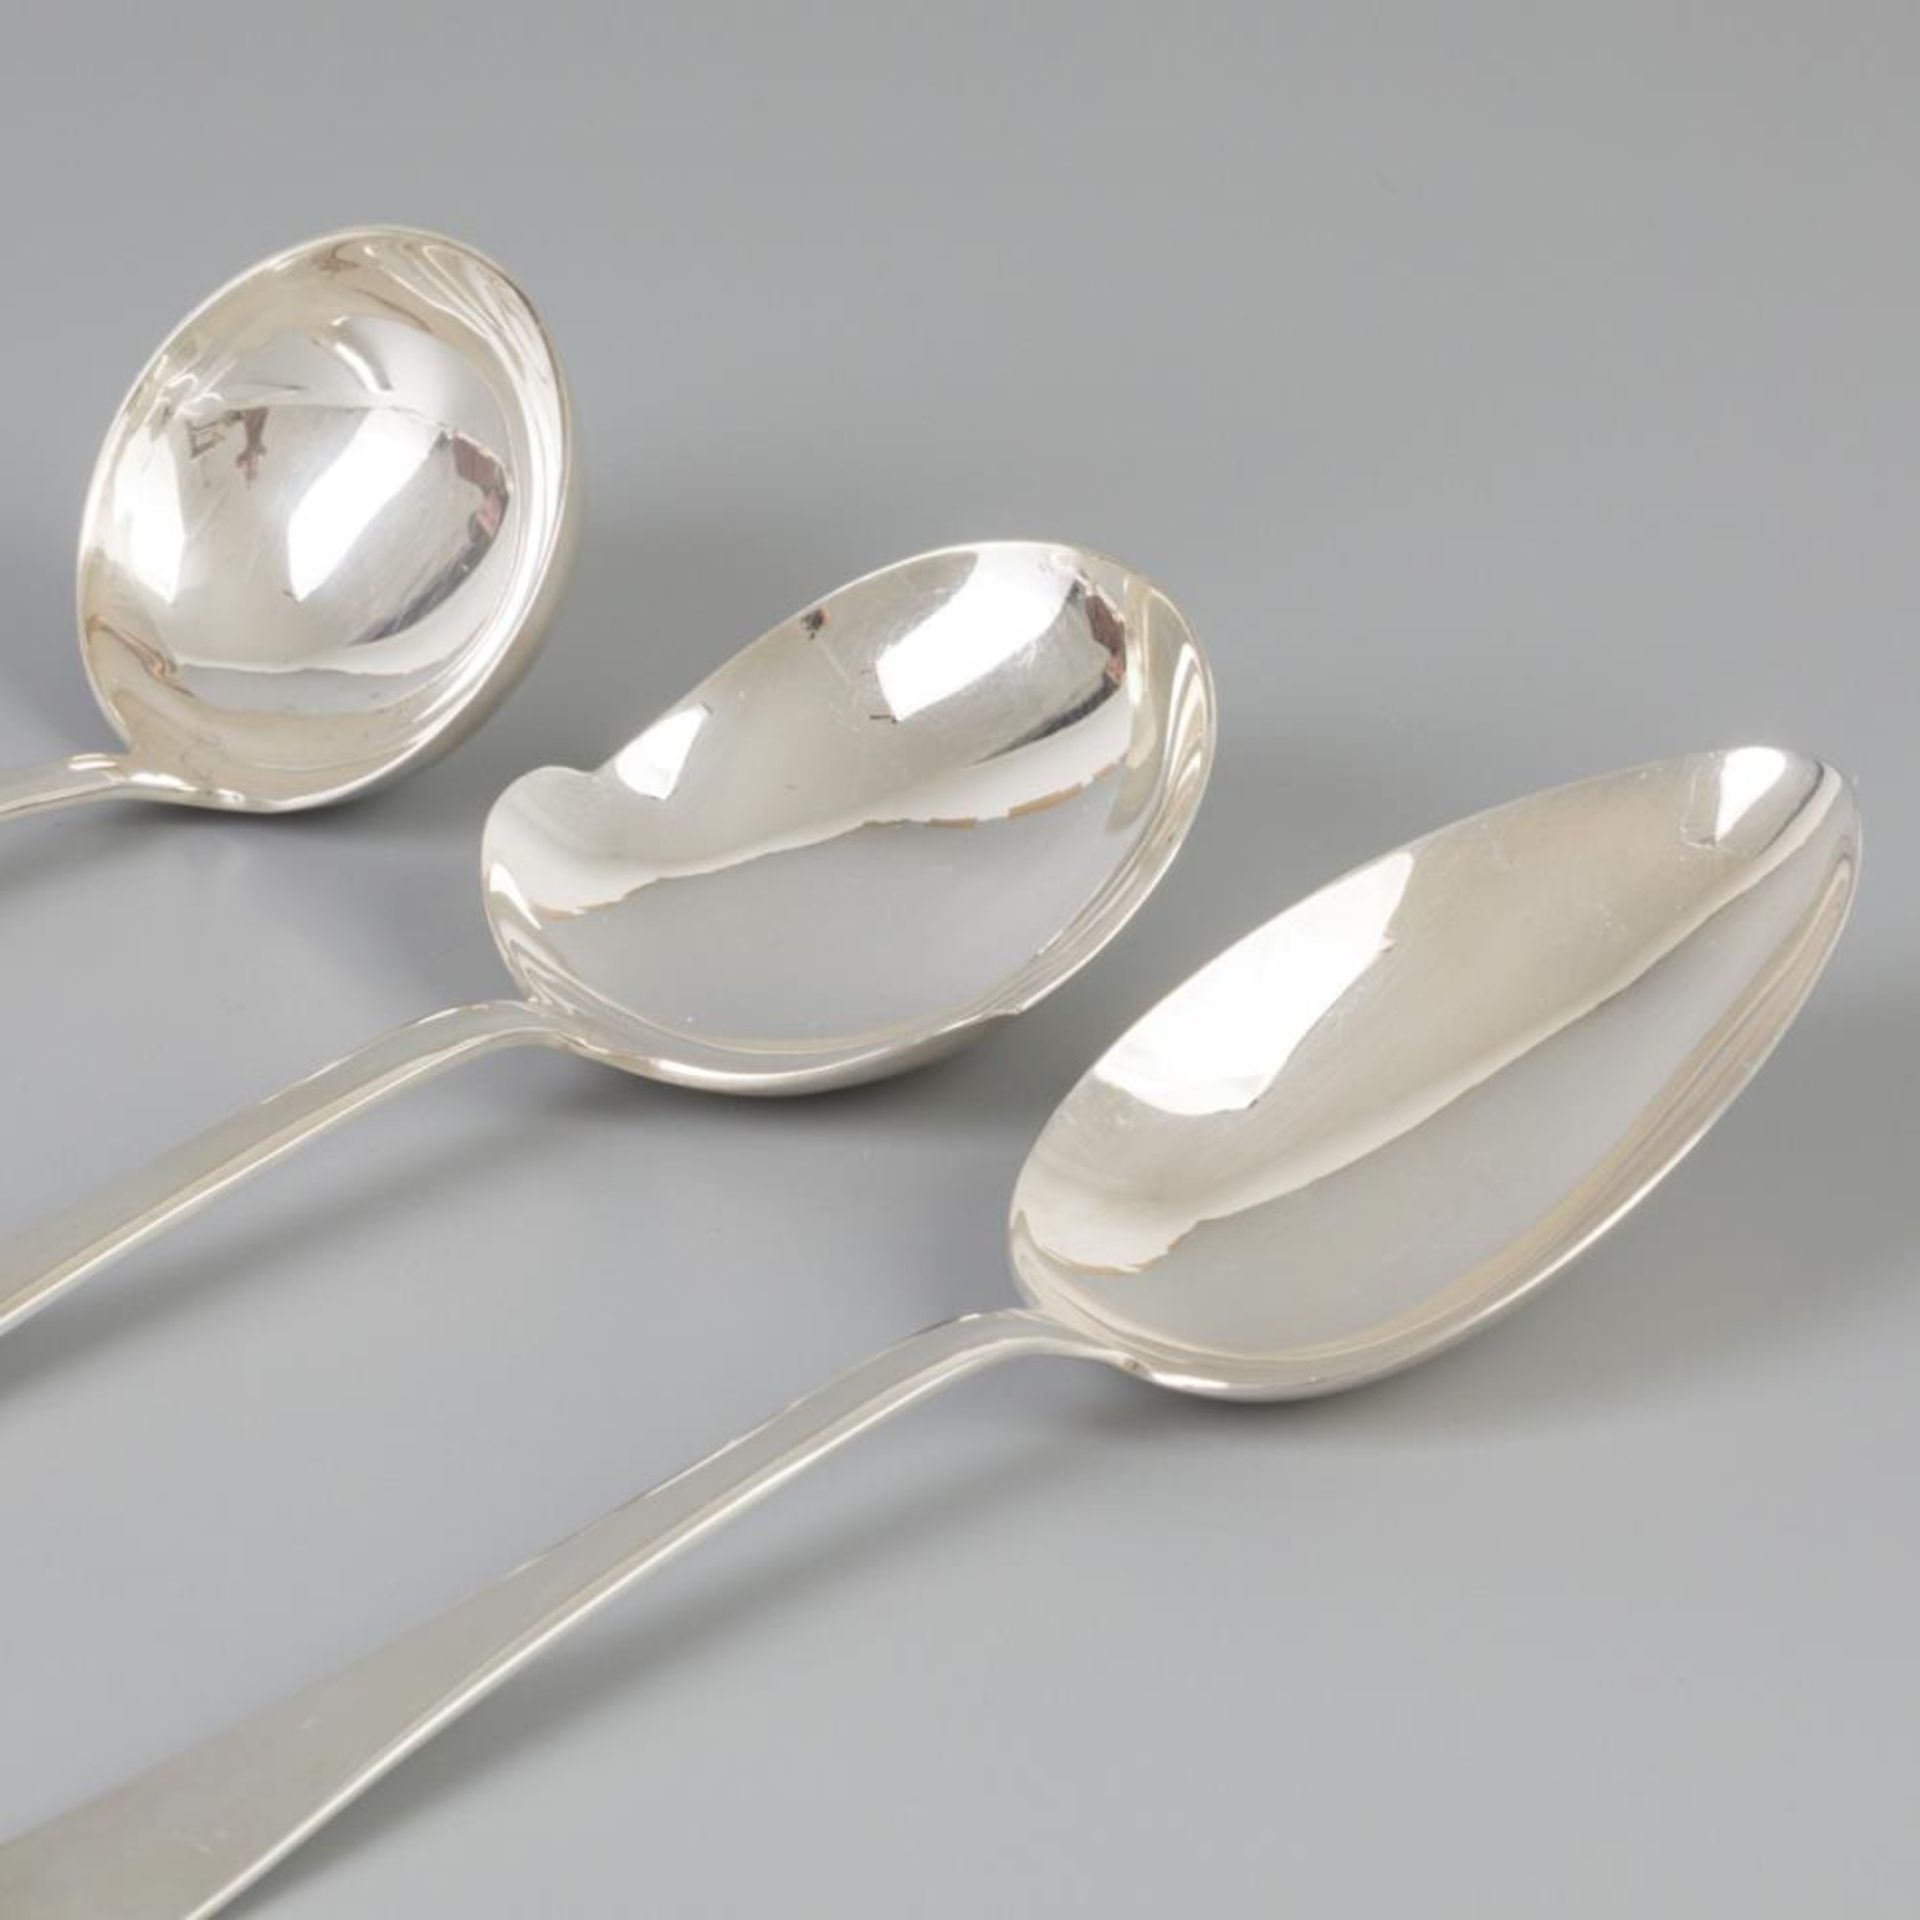 3 piece set of spoons / laddles "Haags Lofje" silver. - Image 2 of 5